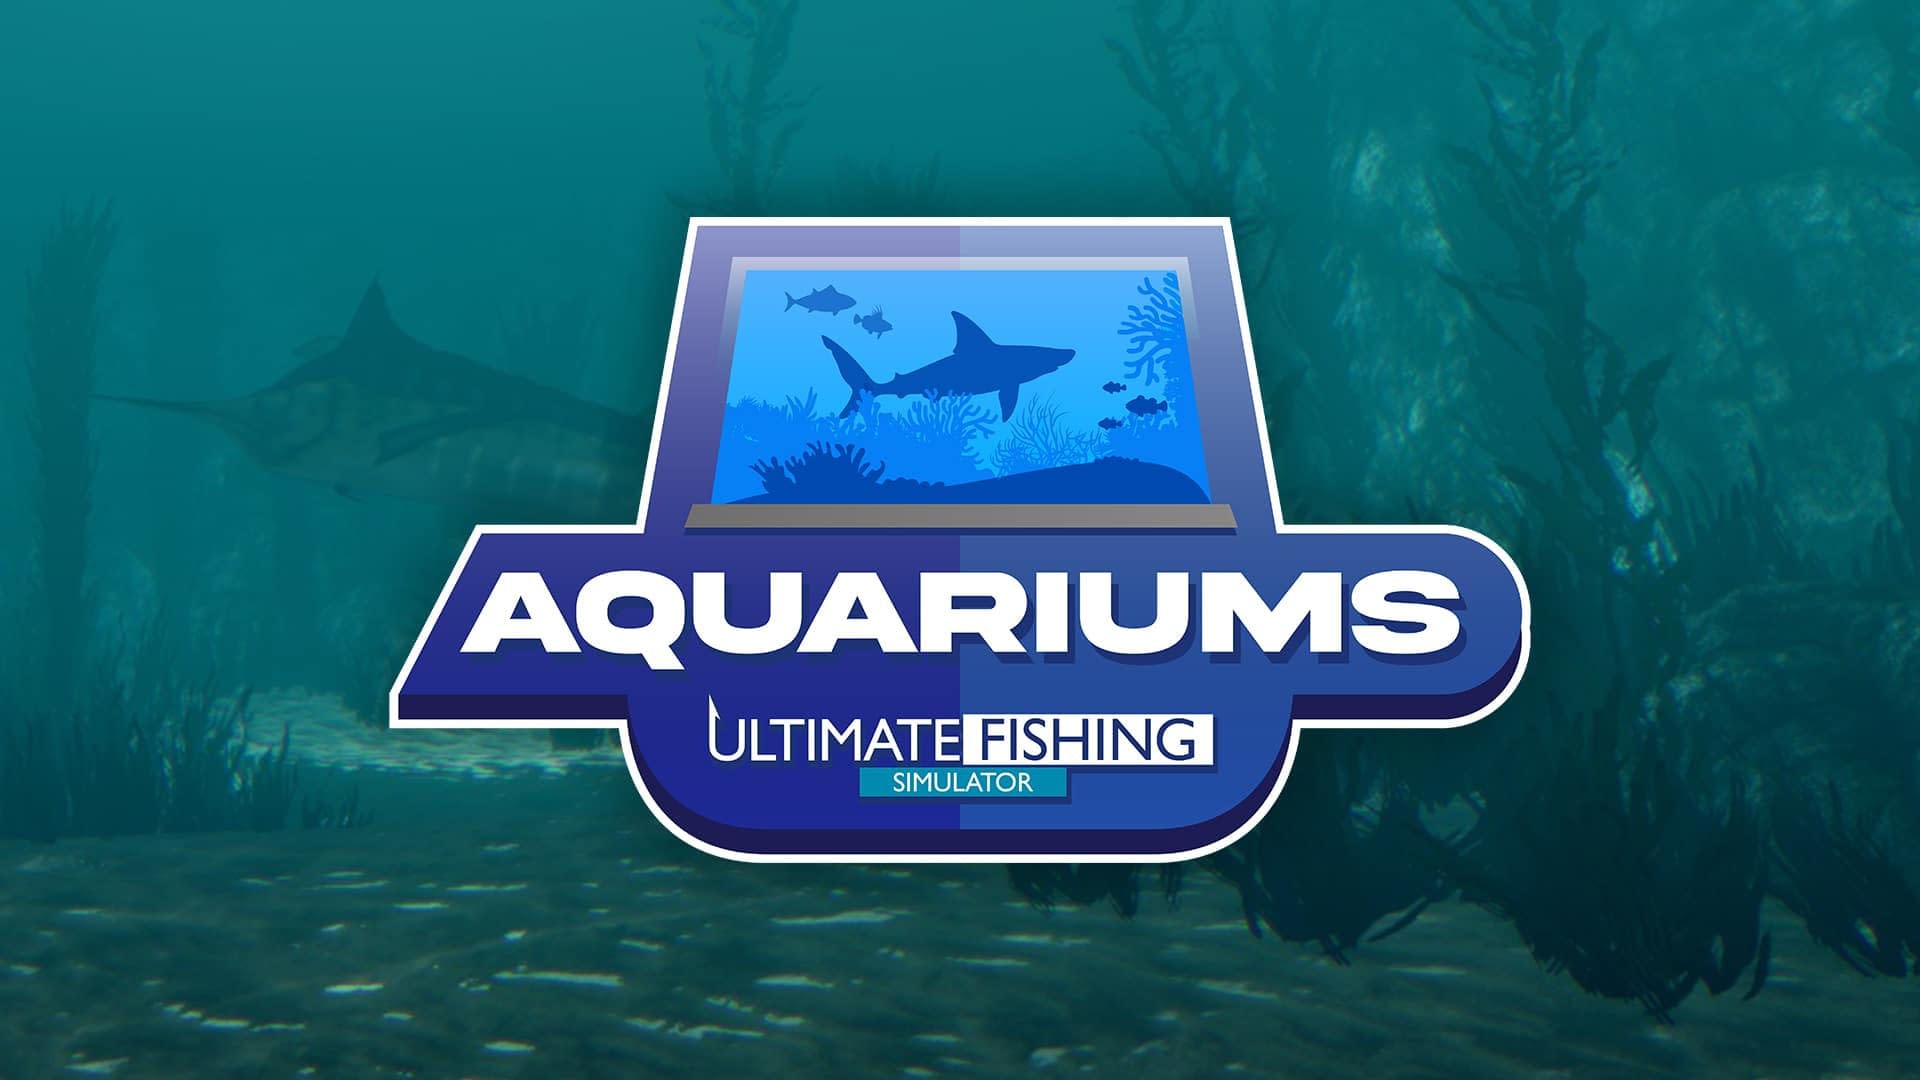 Ultimate Fishing Simulator Receives Two New DLCs